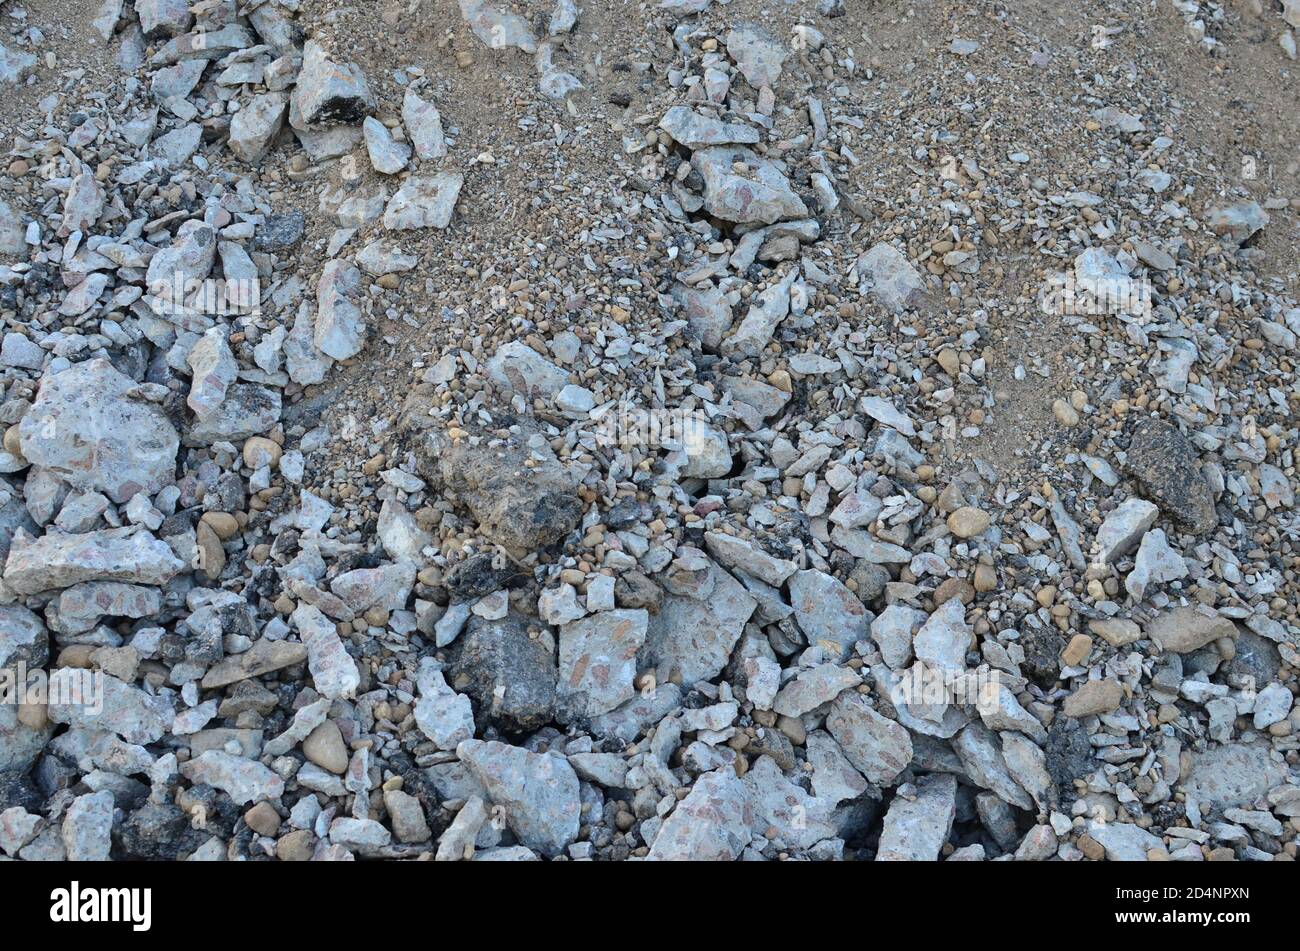 Recycled concrete aggregate (RCA) which is produced by crushing concrete reclaimed from concrete buildings, slabs, bridge decks, demolished highways. Stock Photo